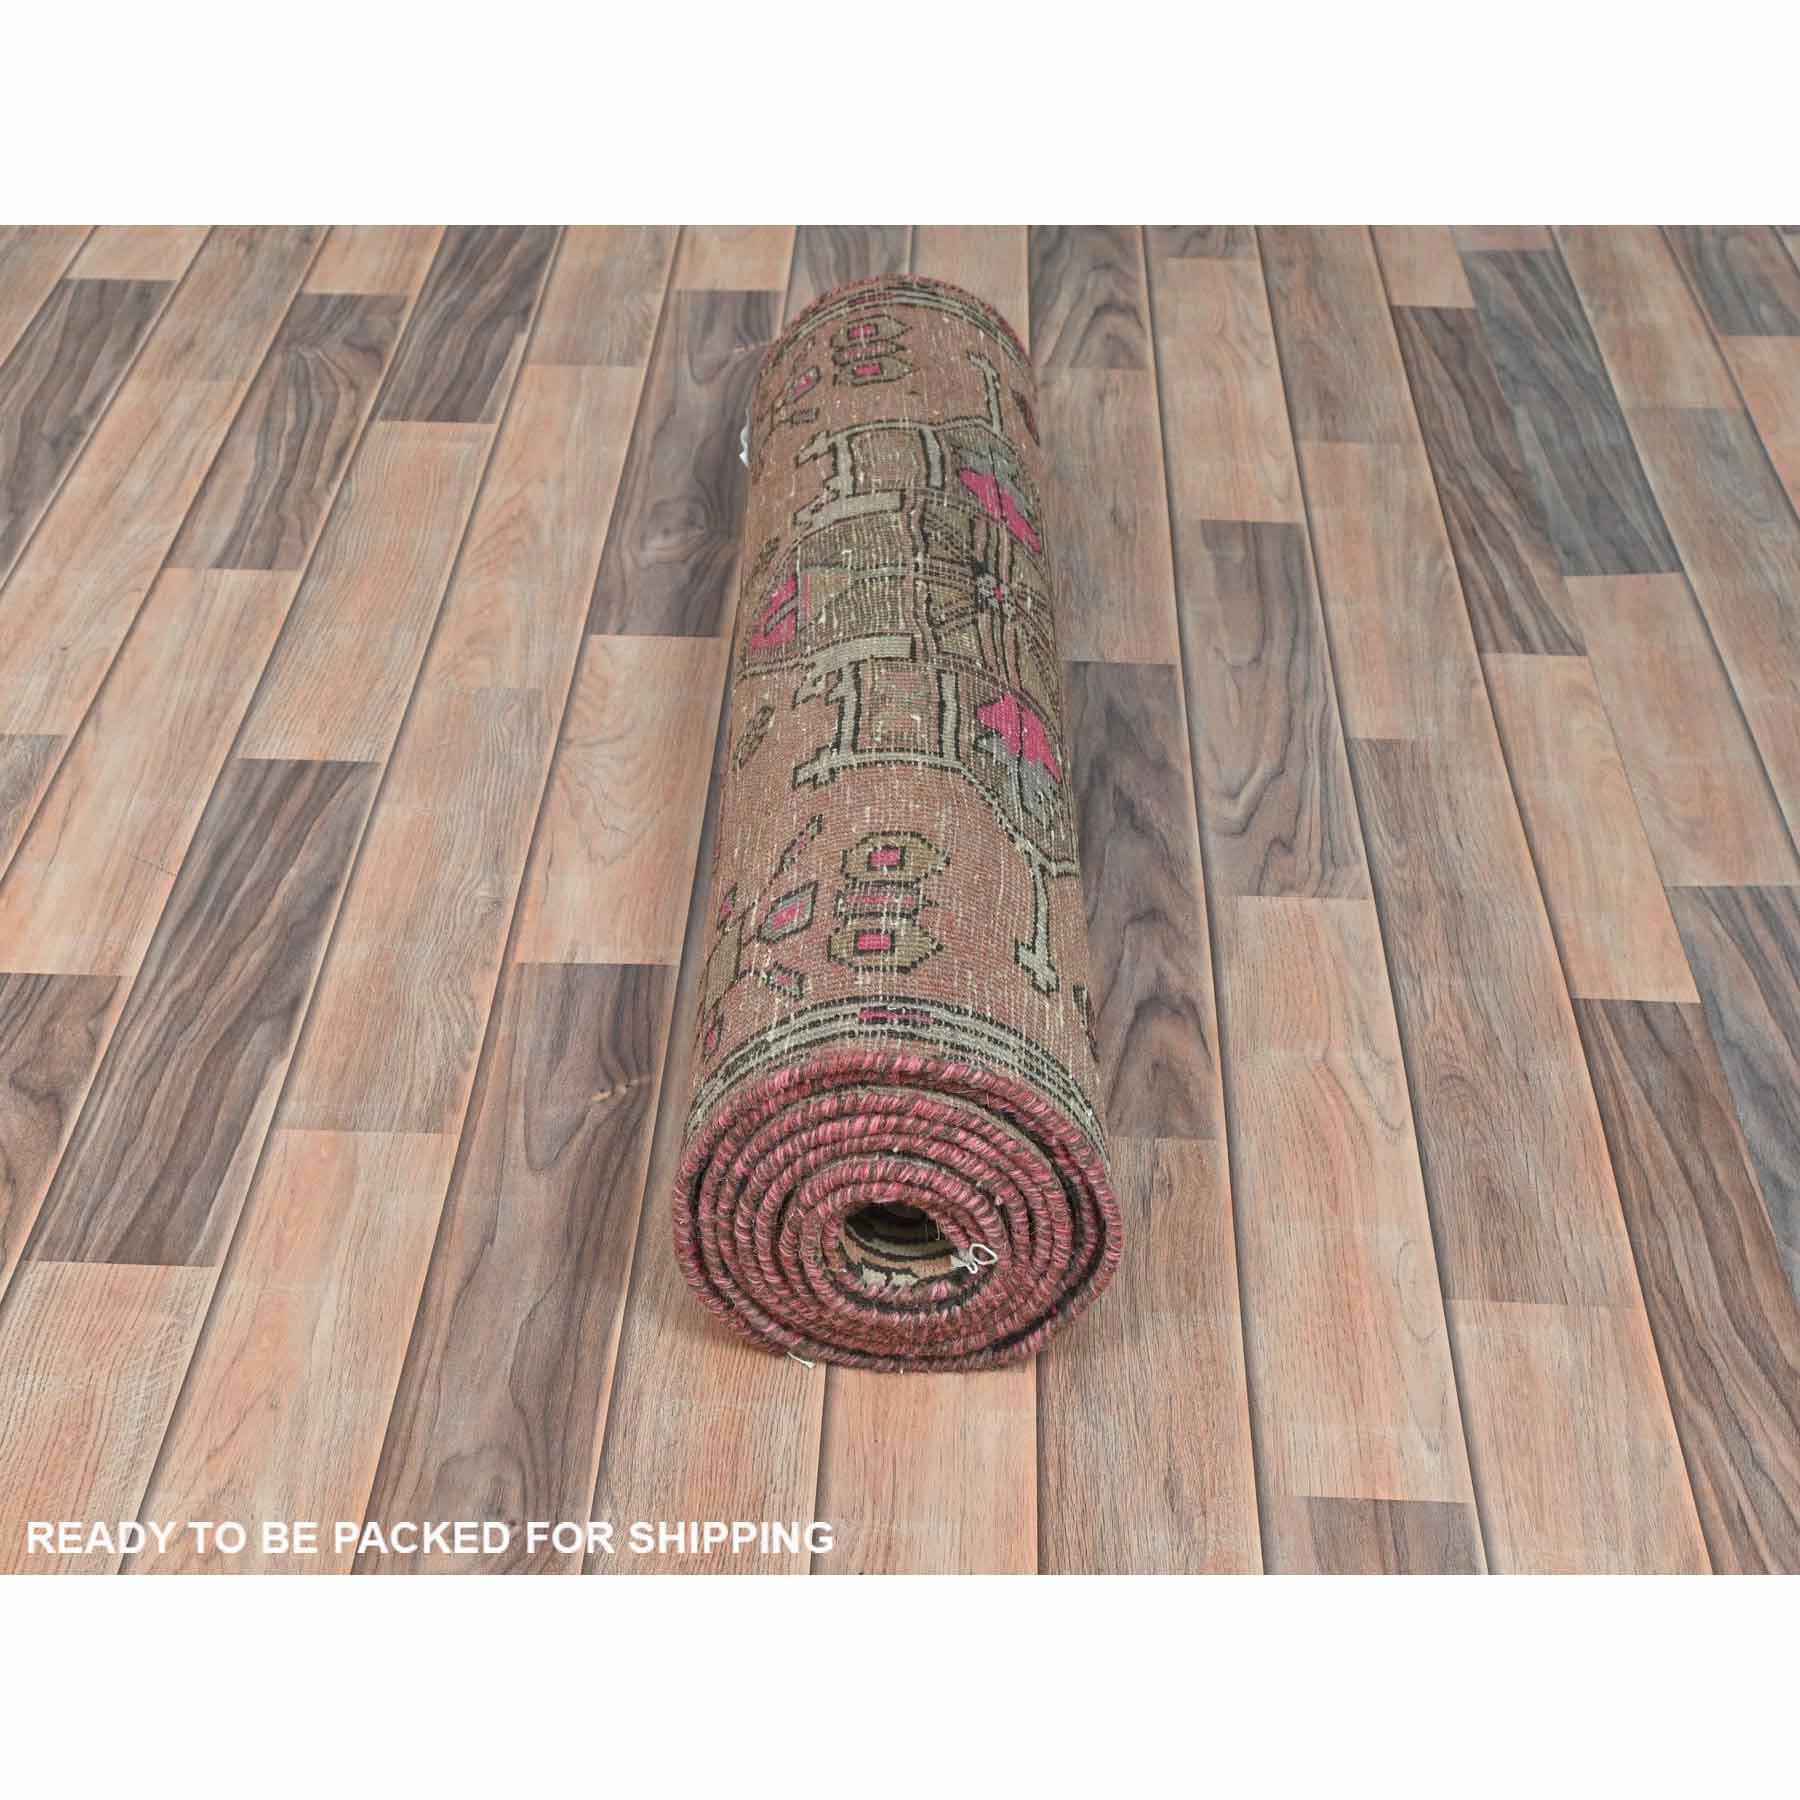 Overdyed-Vintage-Hand-Knotted-Rug-409490